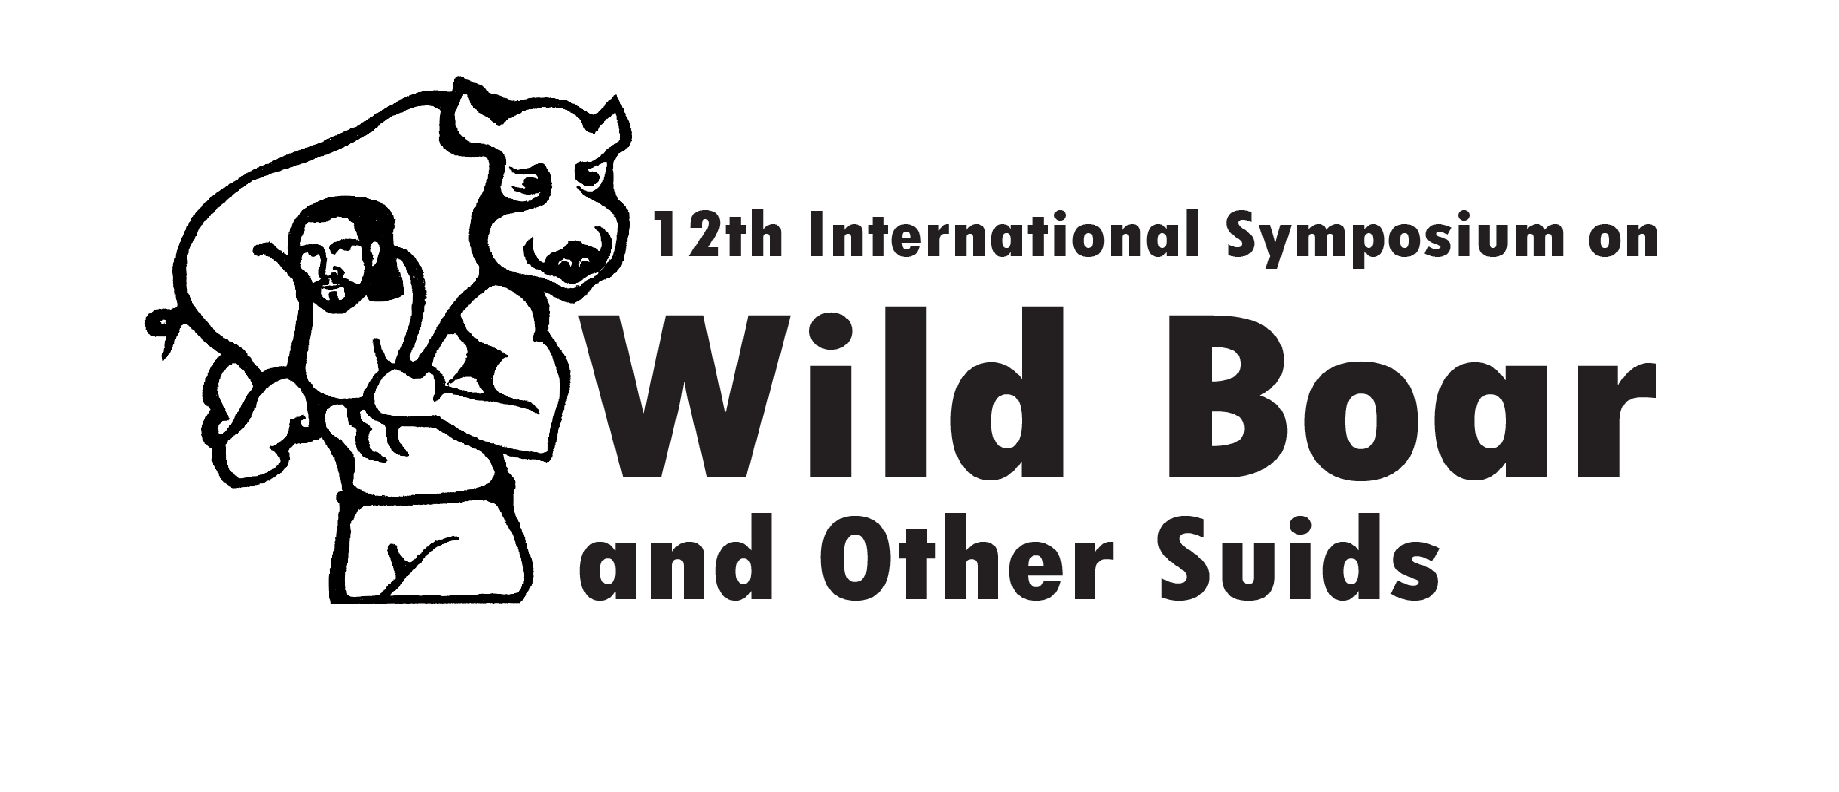 12th International Symposium on Wildboar and other Suids